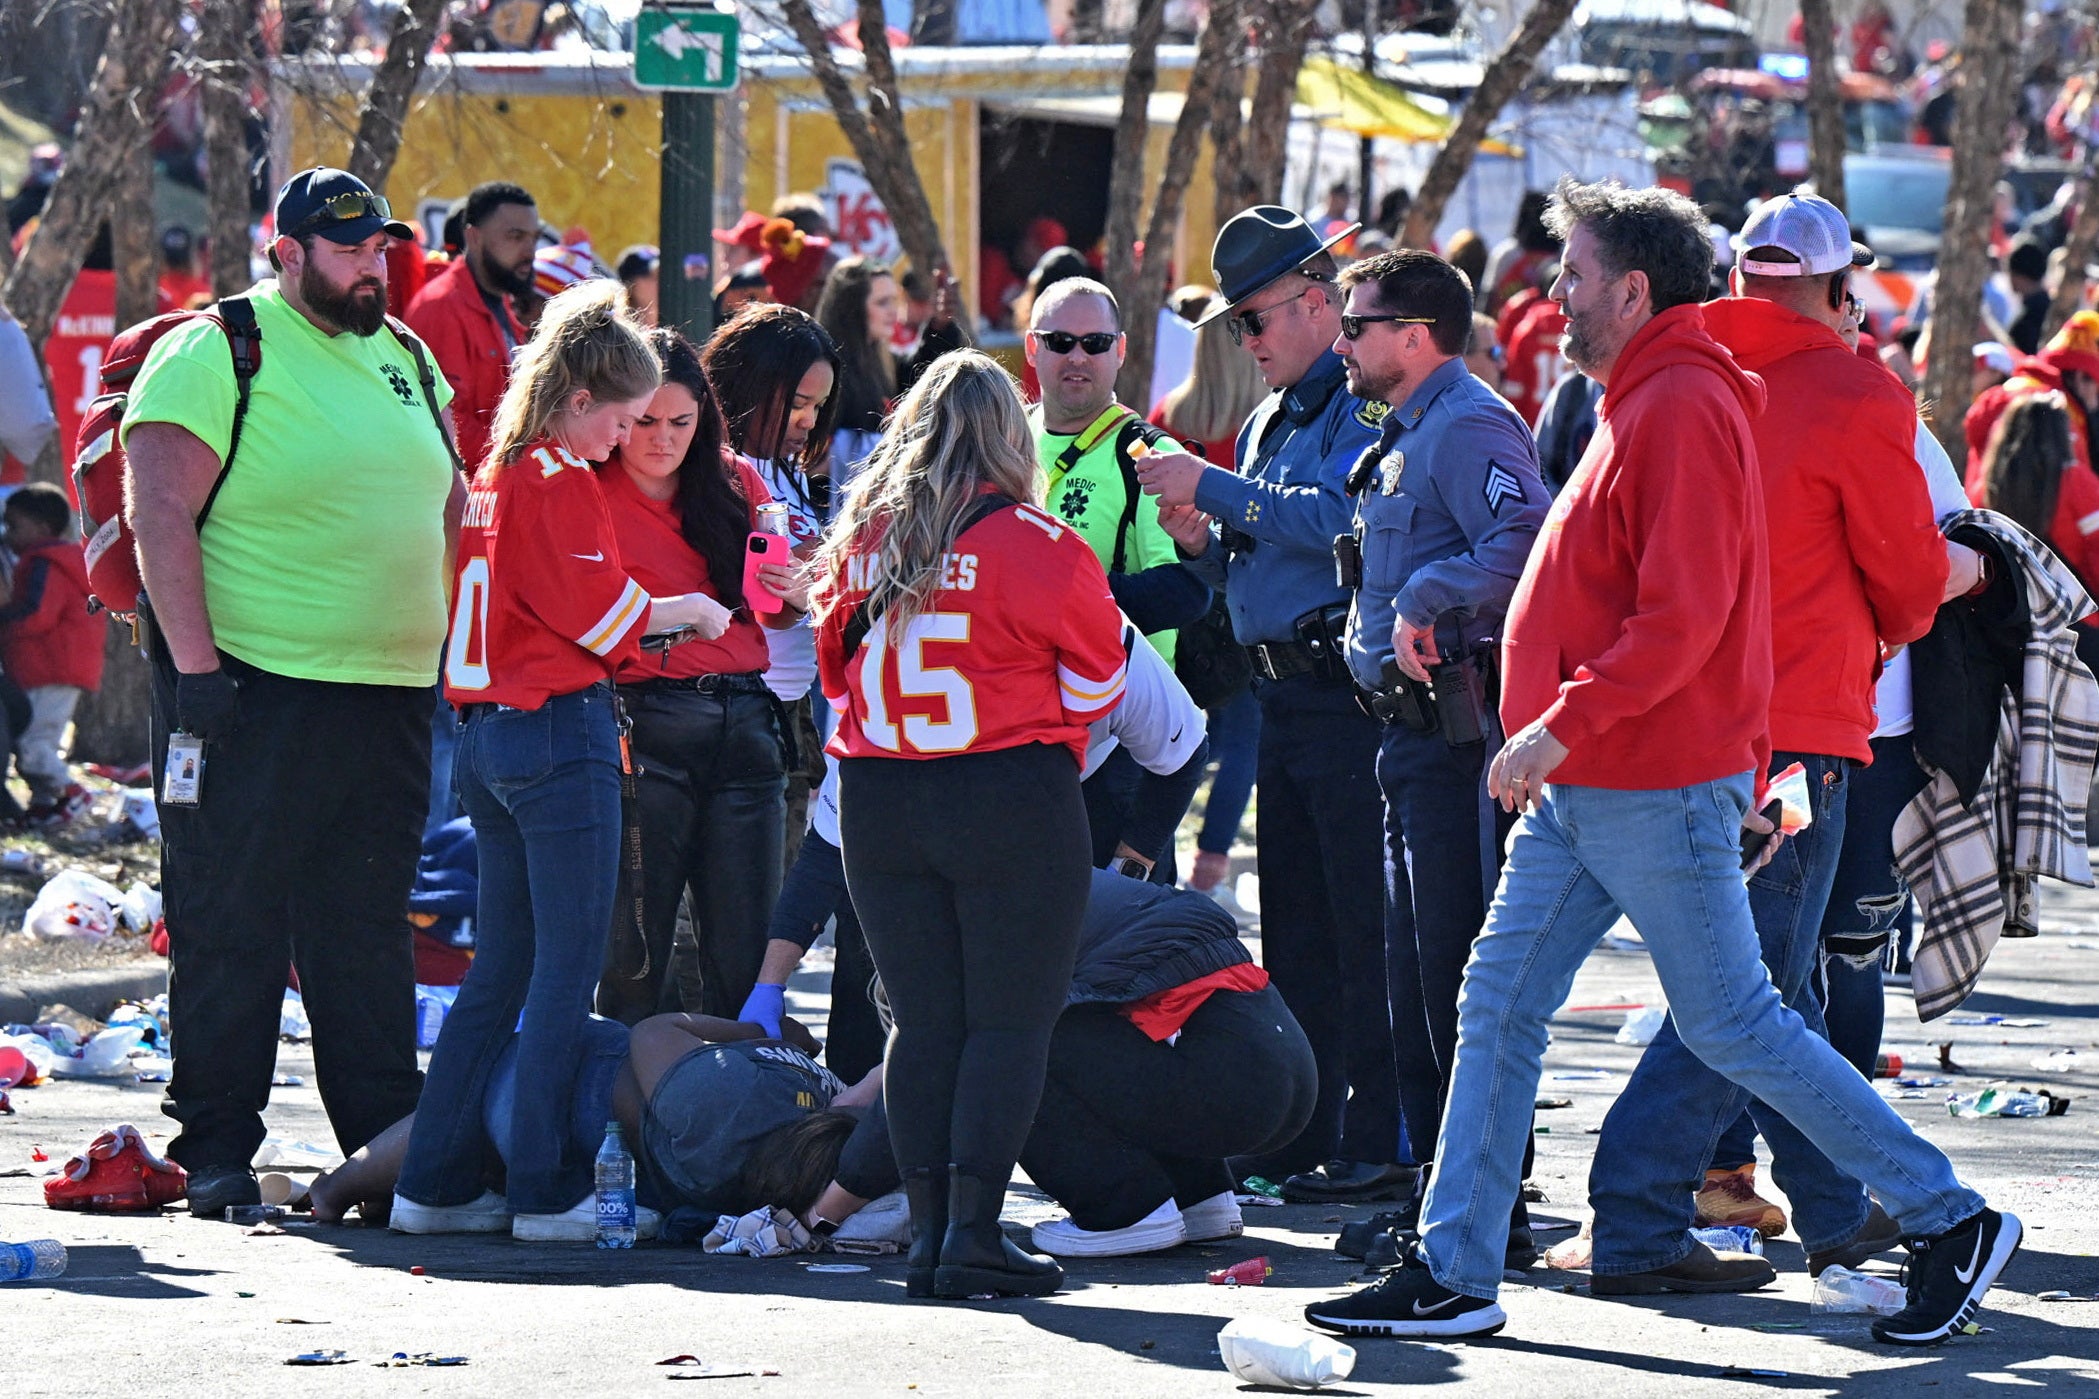 One person was shot dead and 22 were injured in Wednesday’s parade shooting